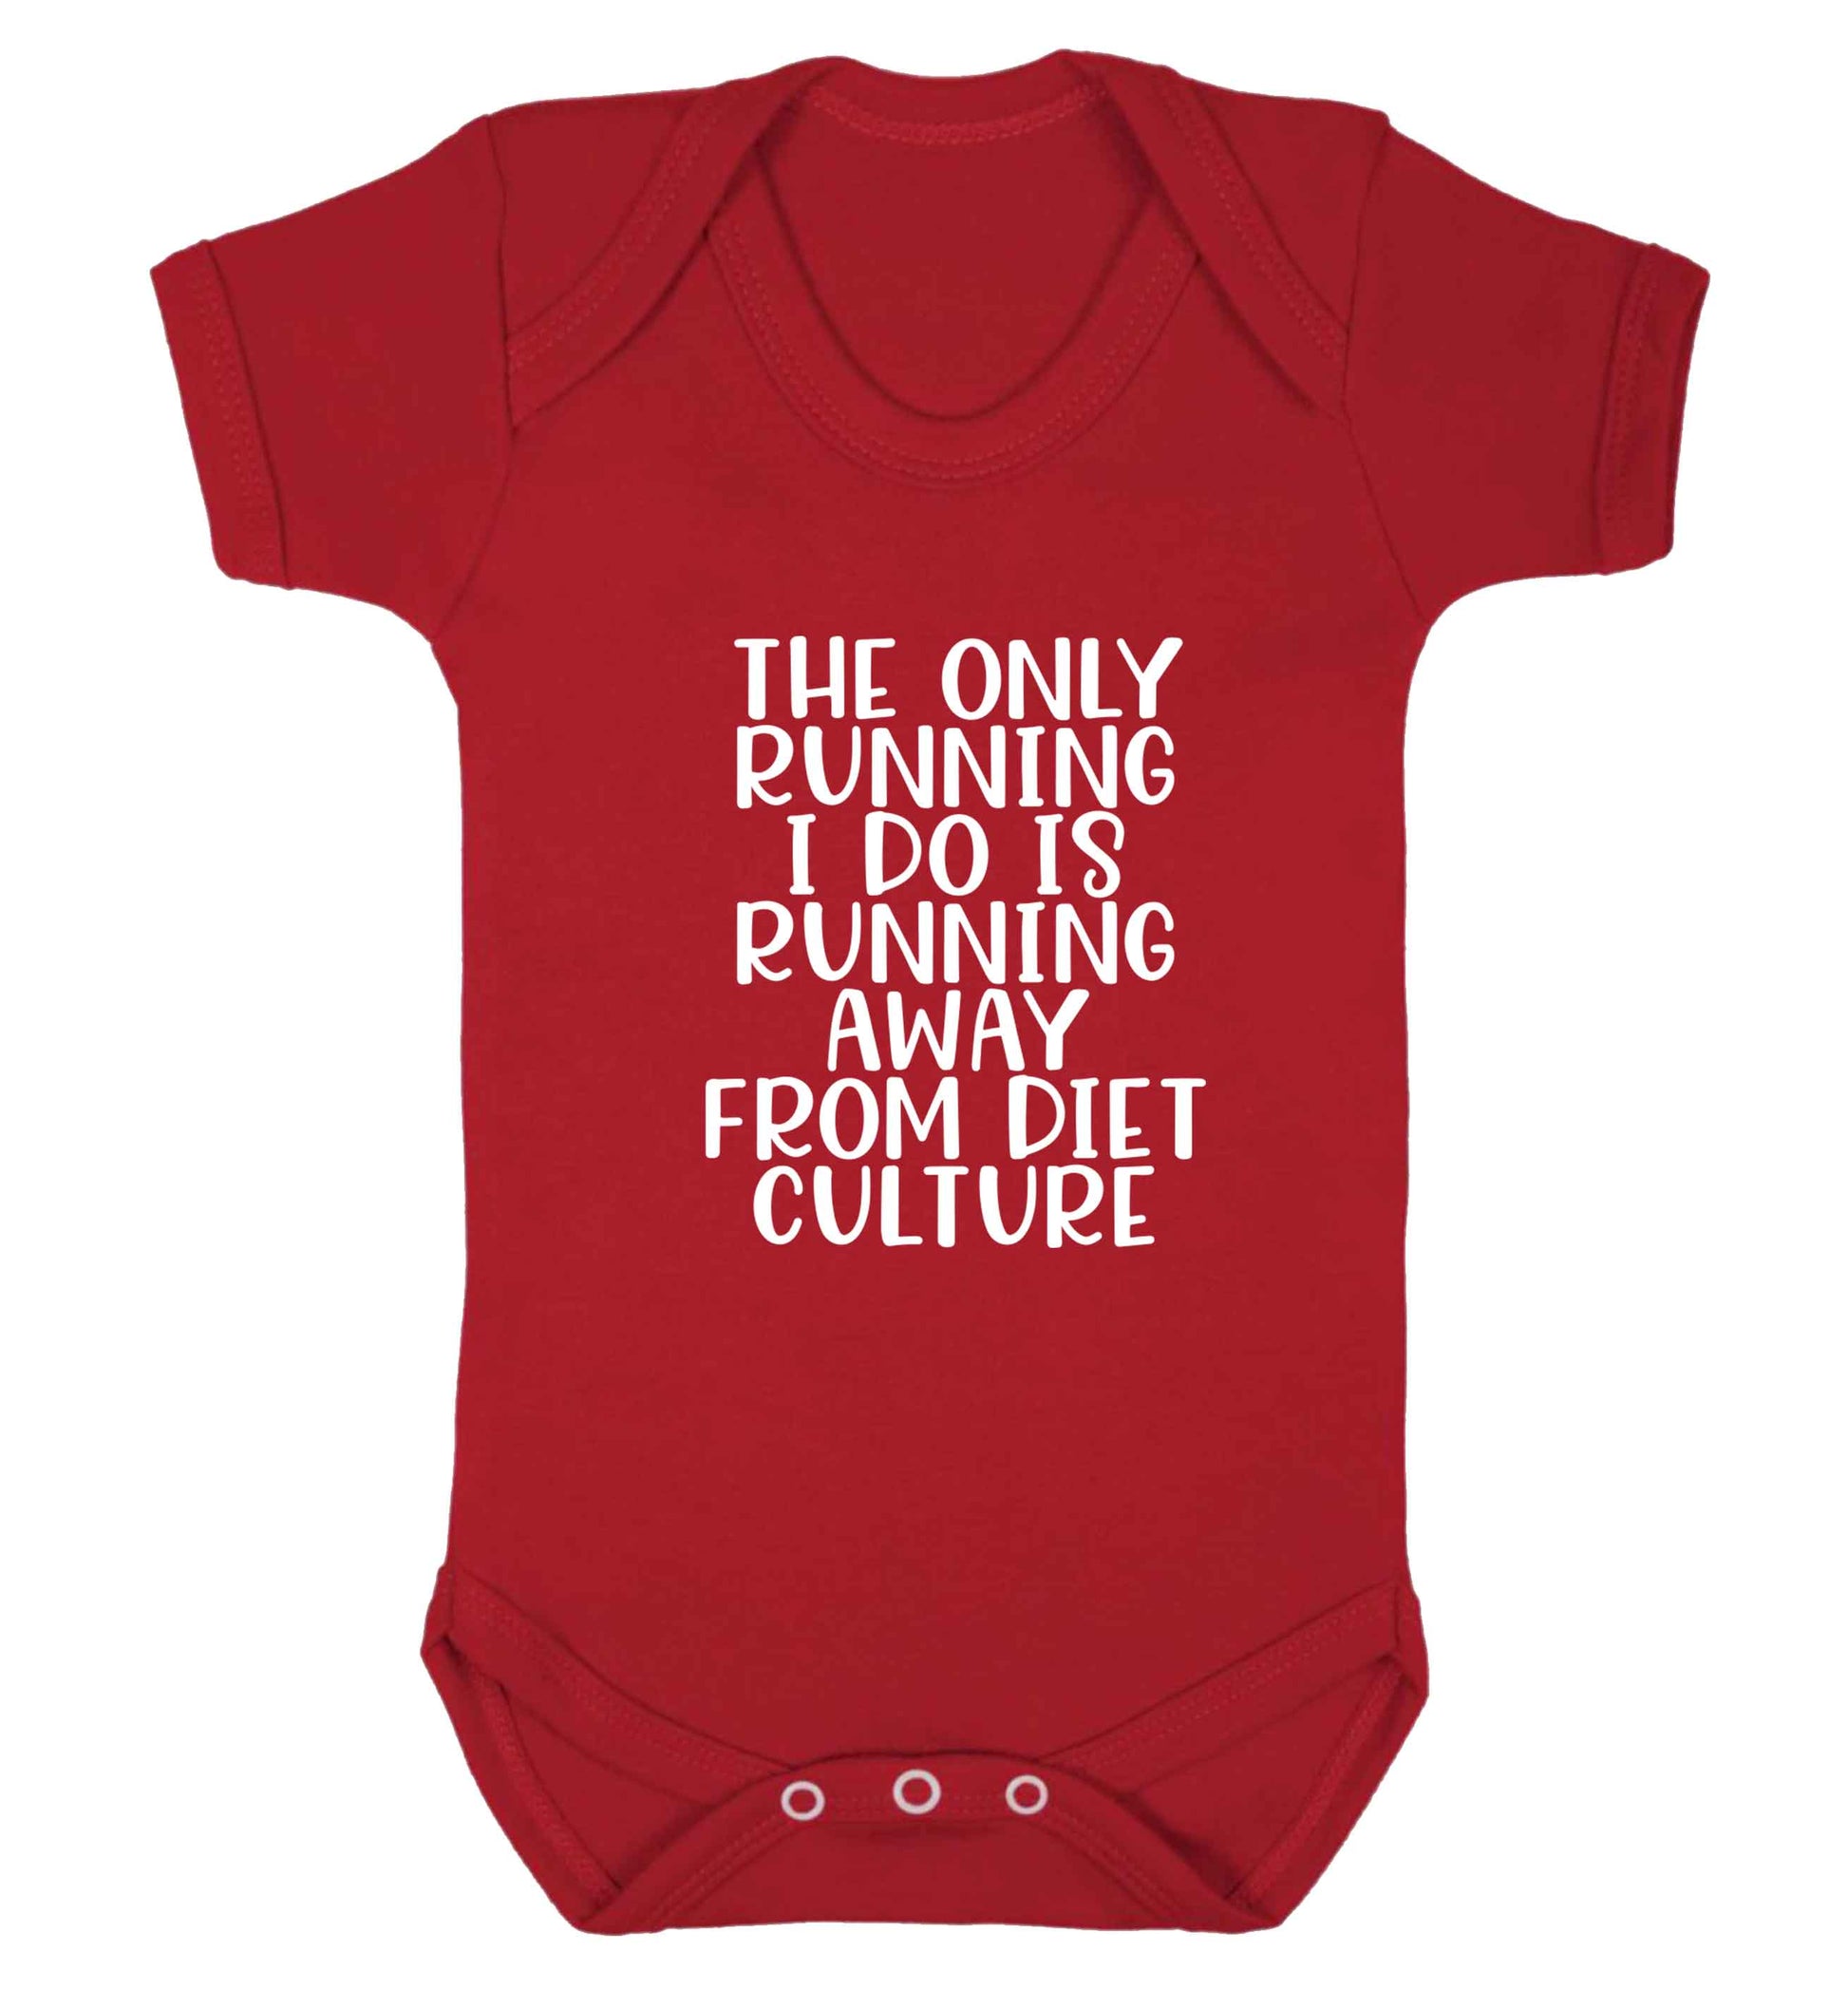 The only running I do is running away from diet culture baby vest red 18-24 months